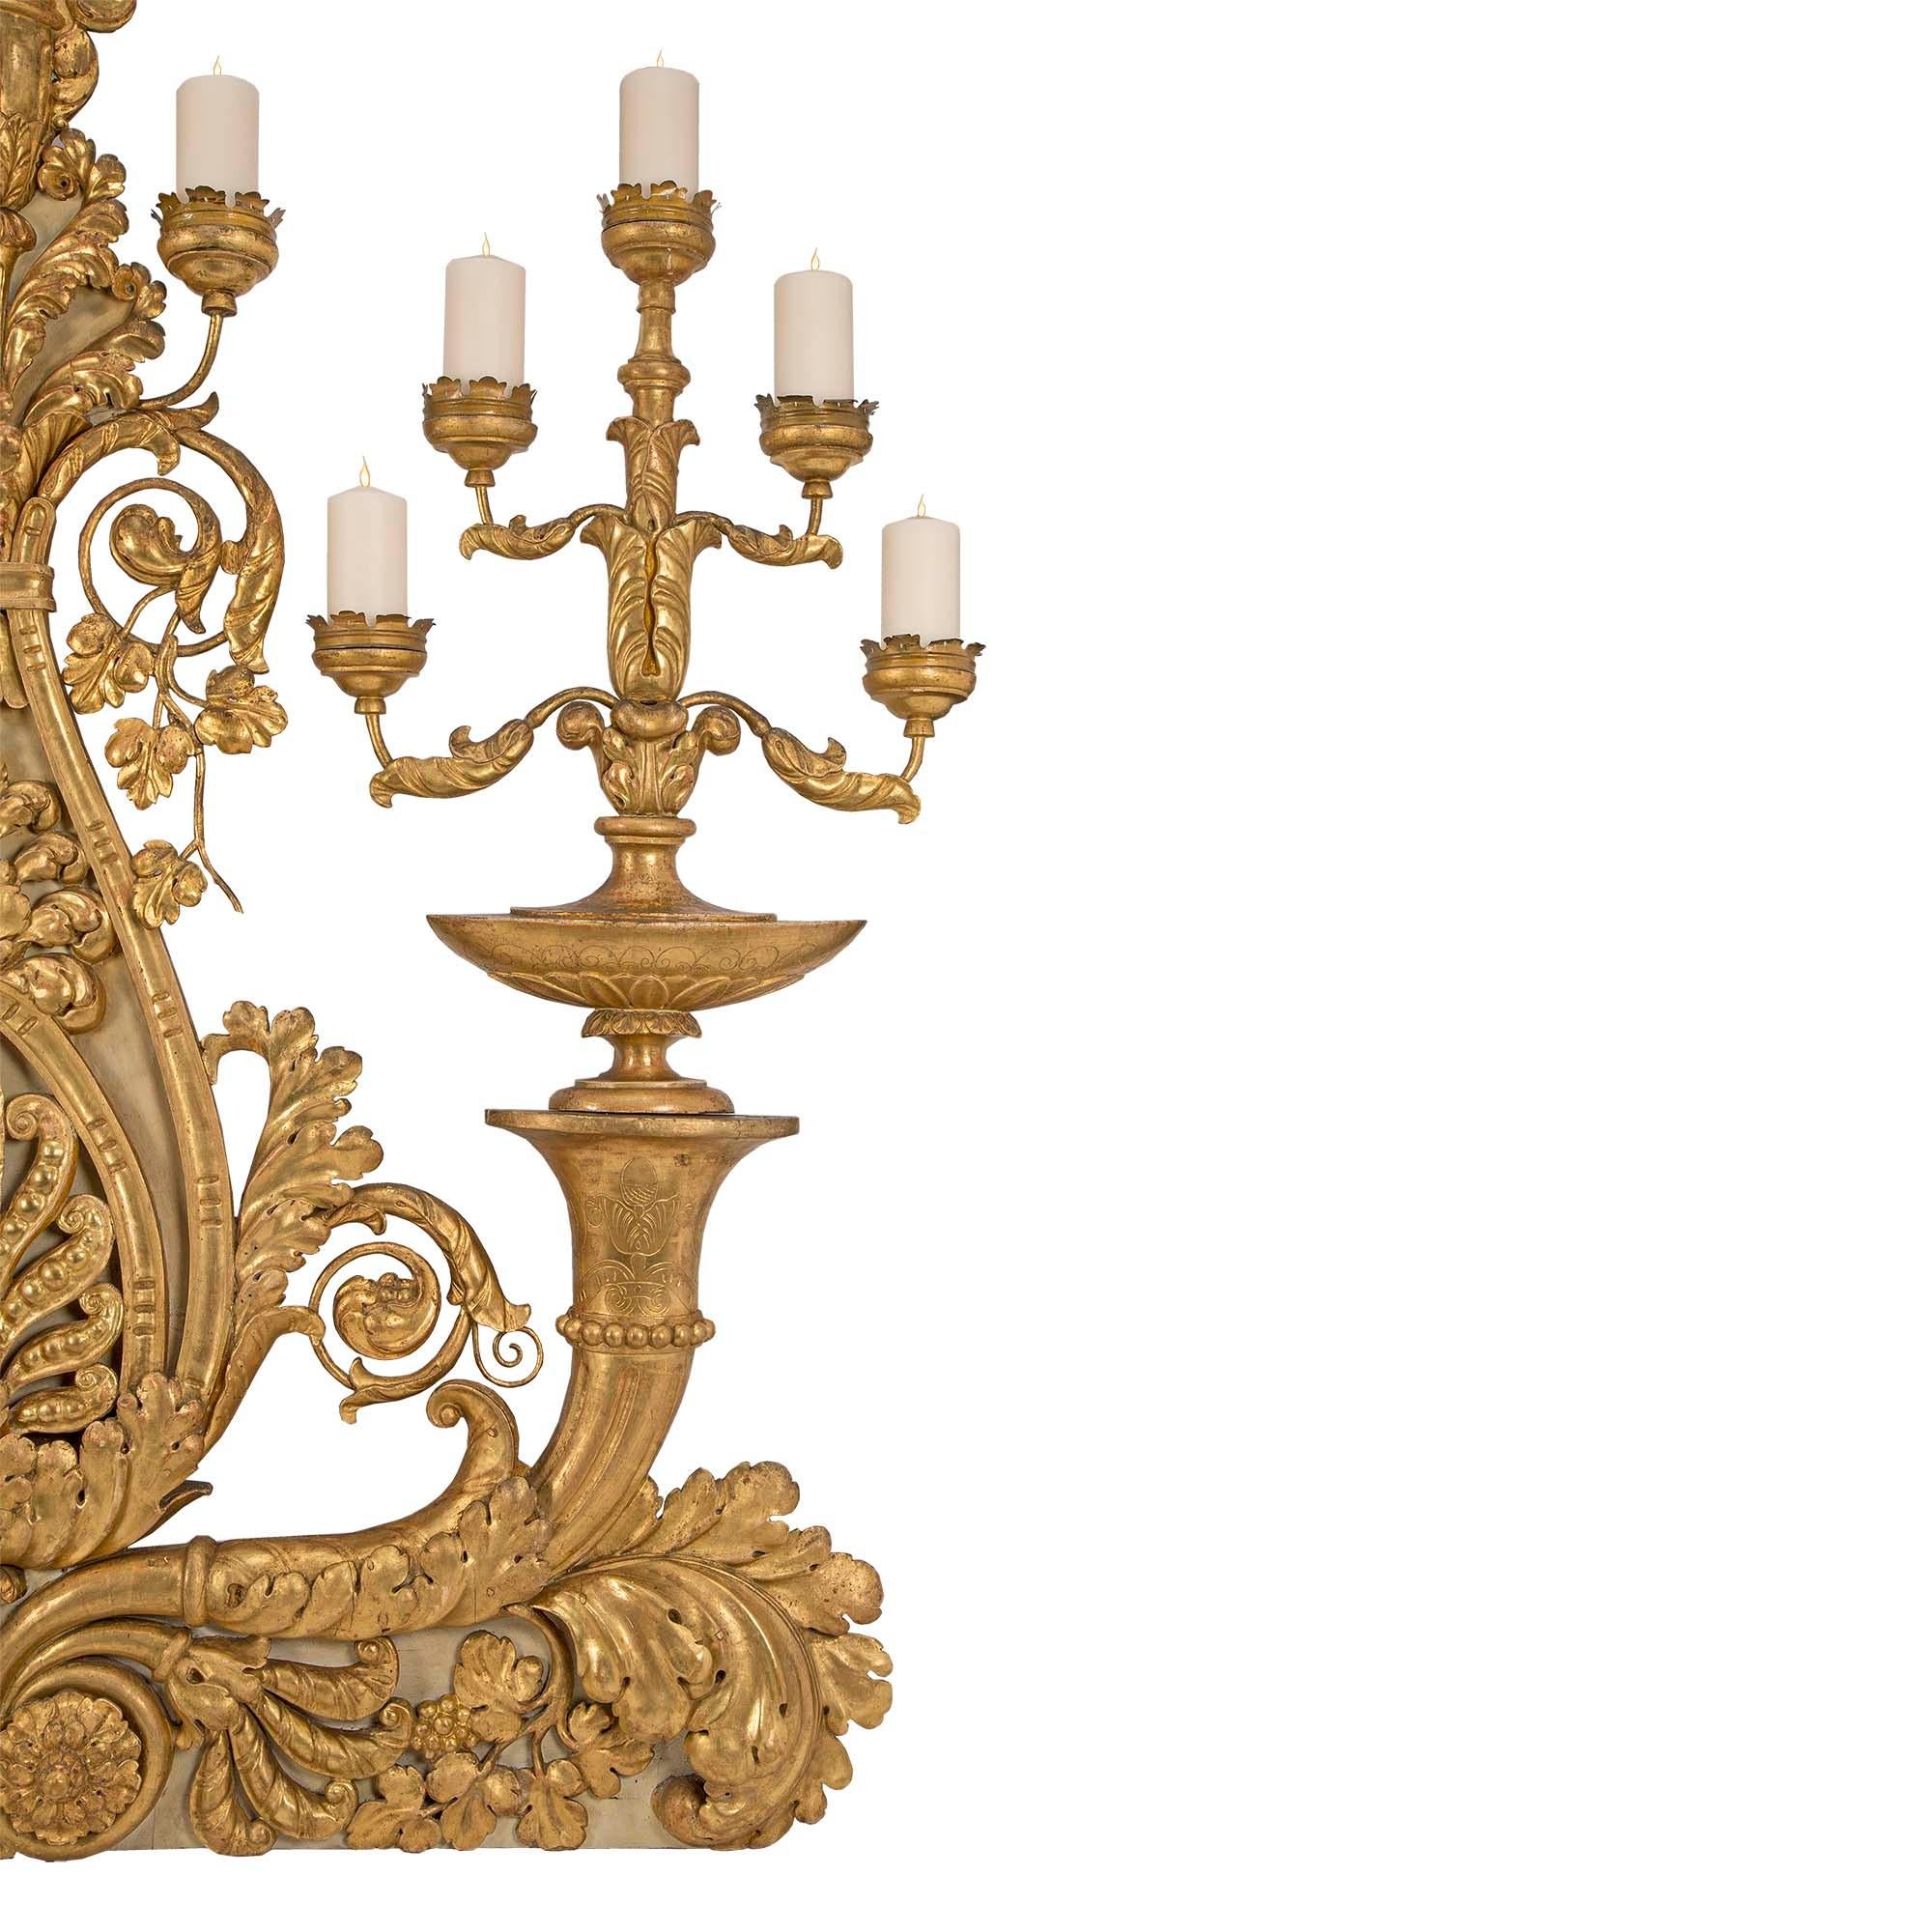 Italian 18th Century Monumental Giltwood and Gilt Metal Tuscan Candelabras For Sale 2